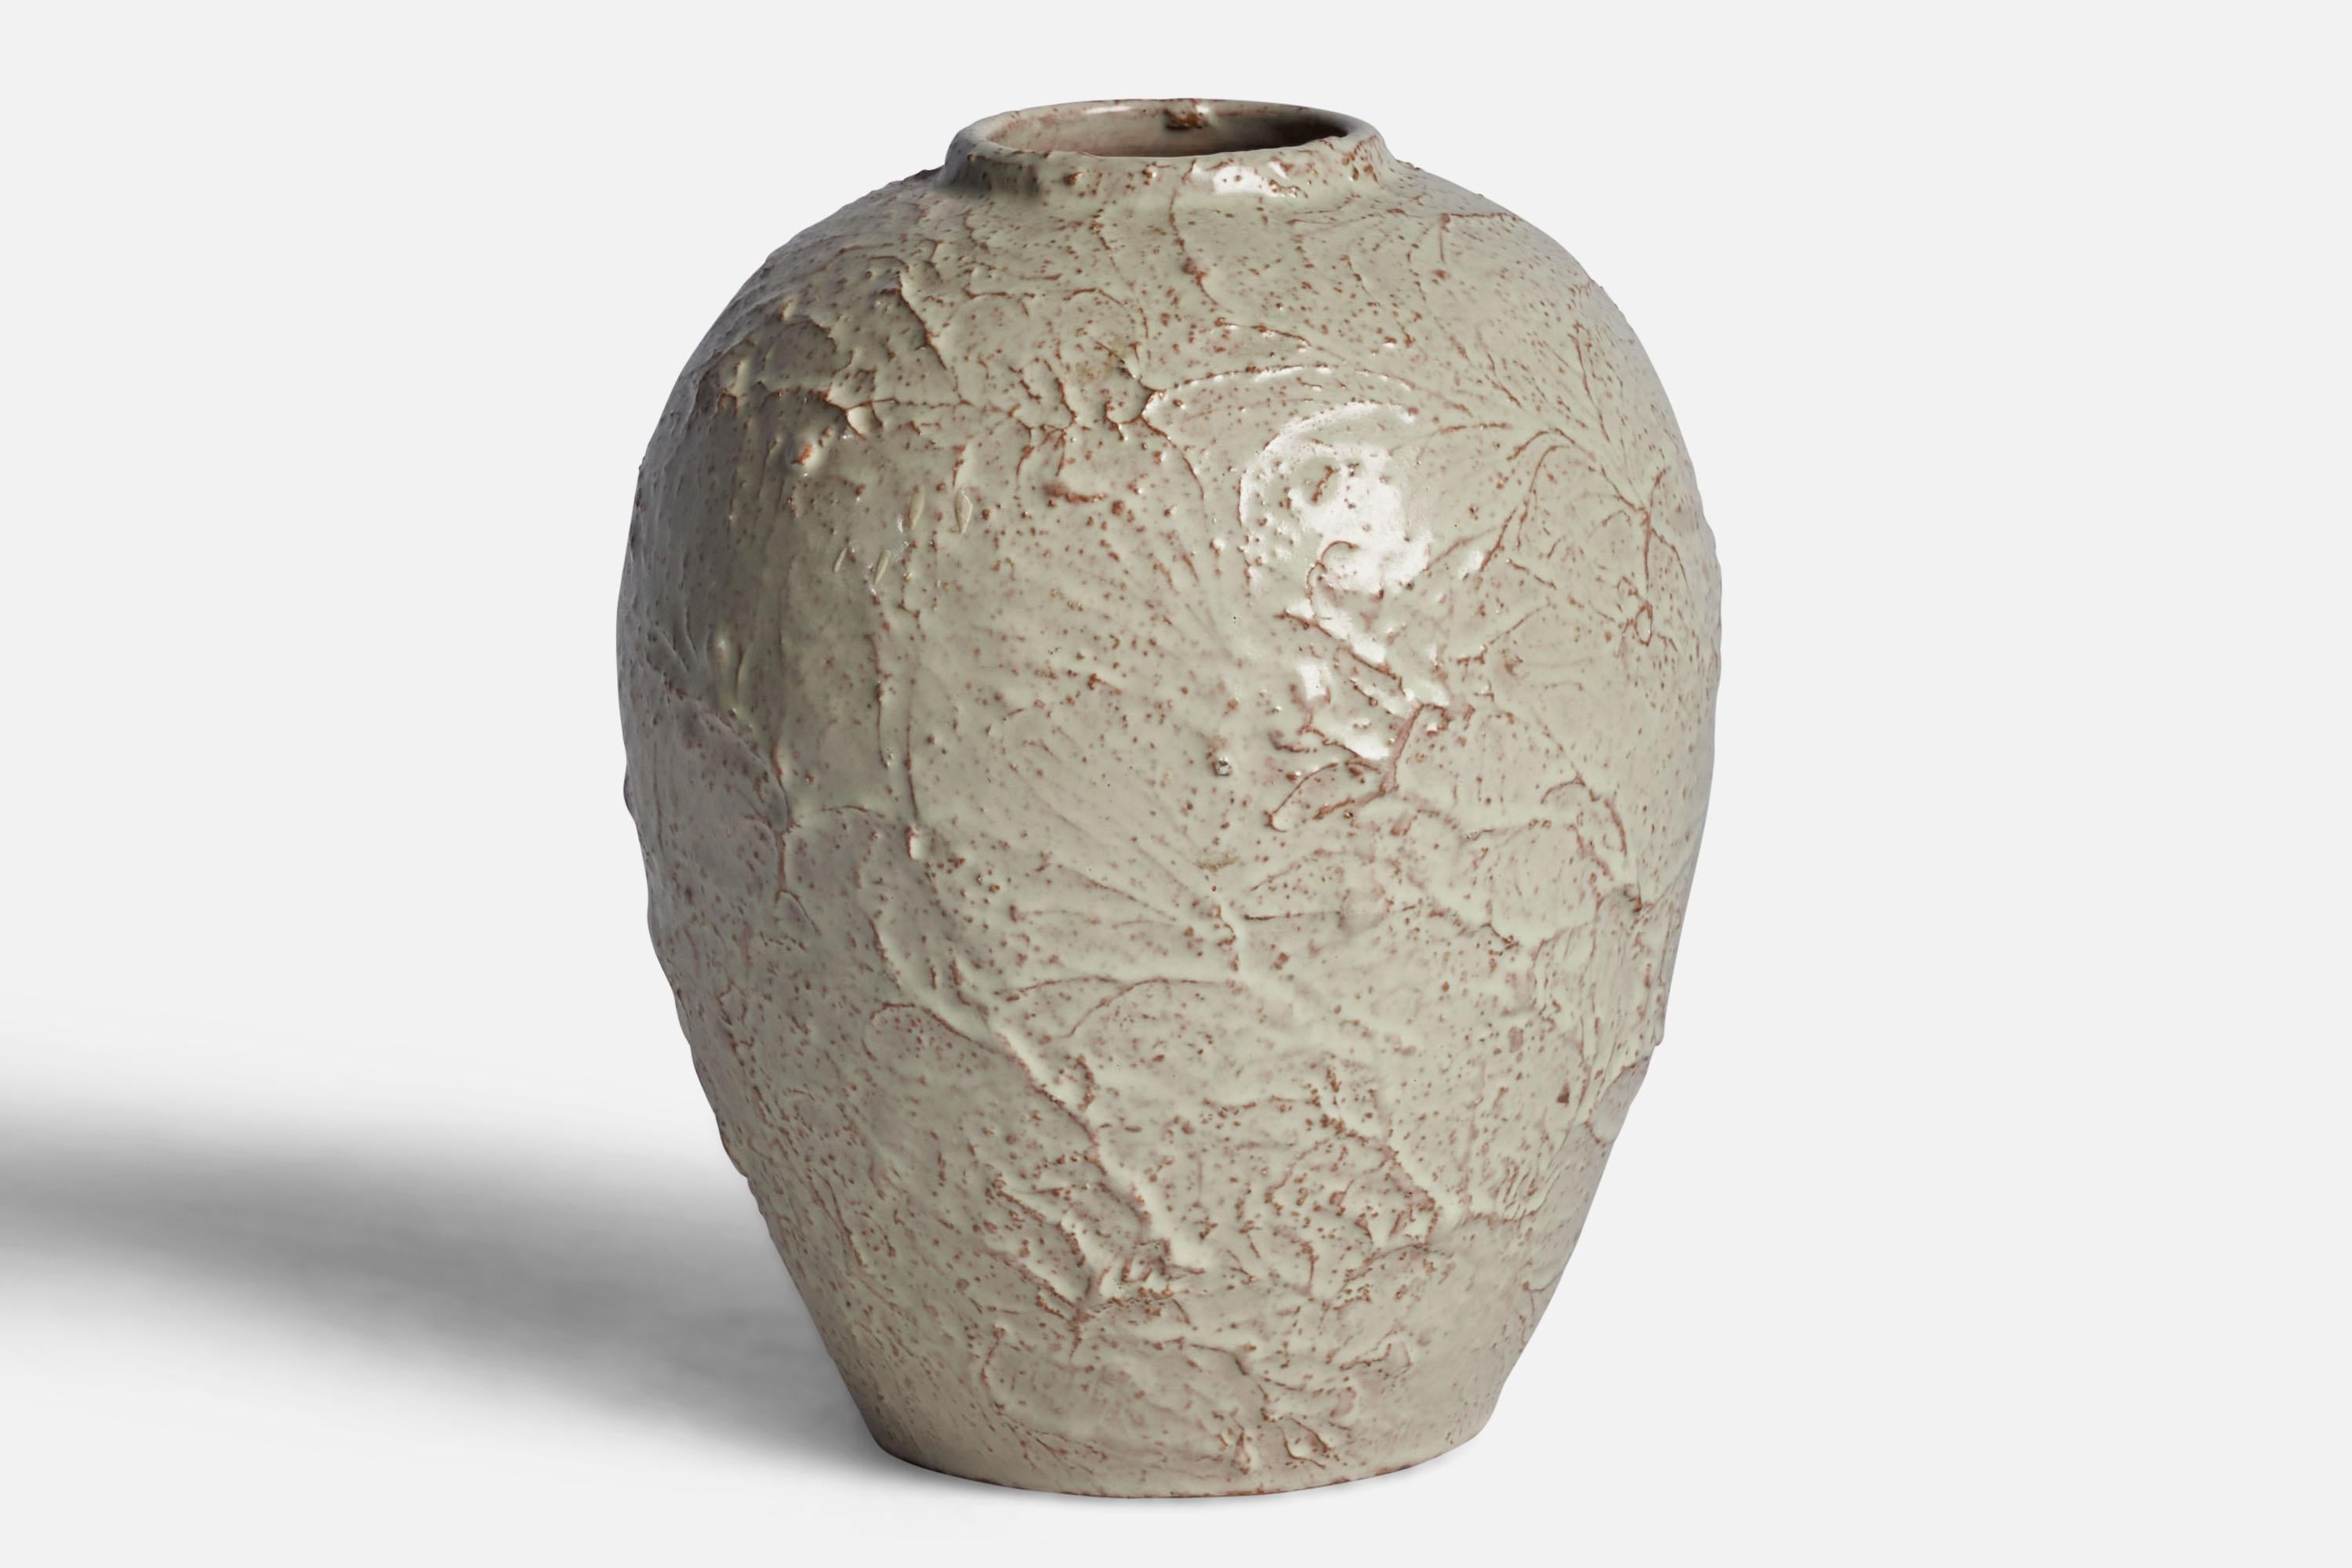 An off-white-glazed stoneware vase designed and produced by Andersson & Johansson, Höganäs, Sweden, 1940s.